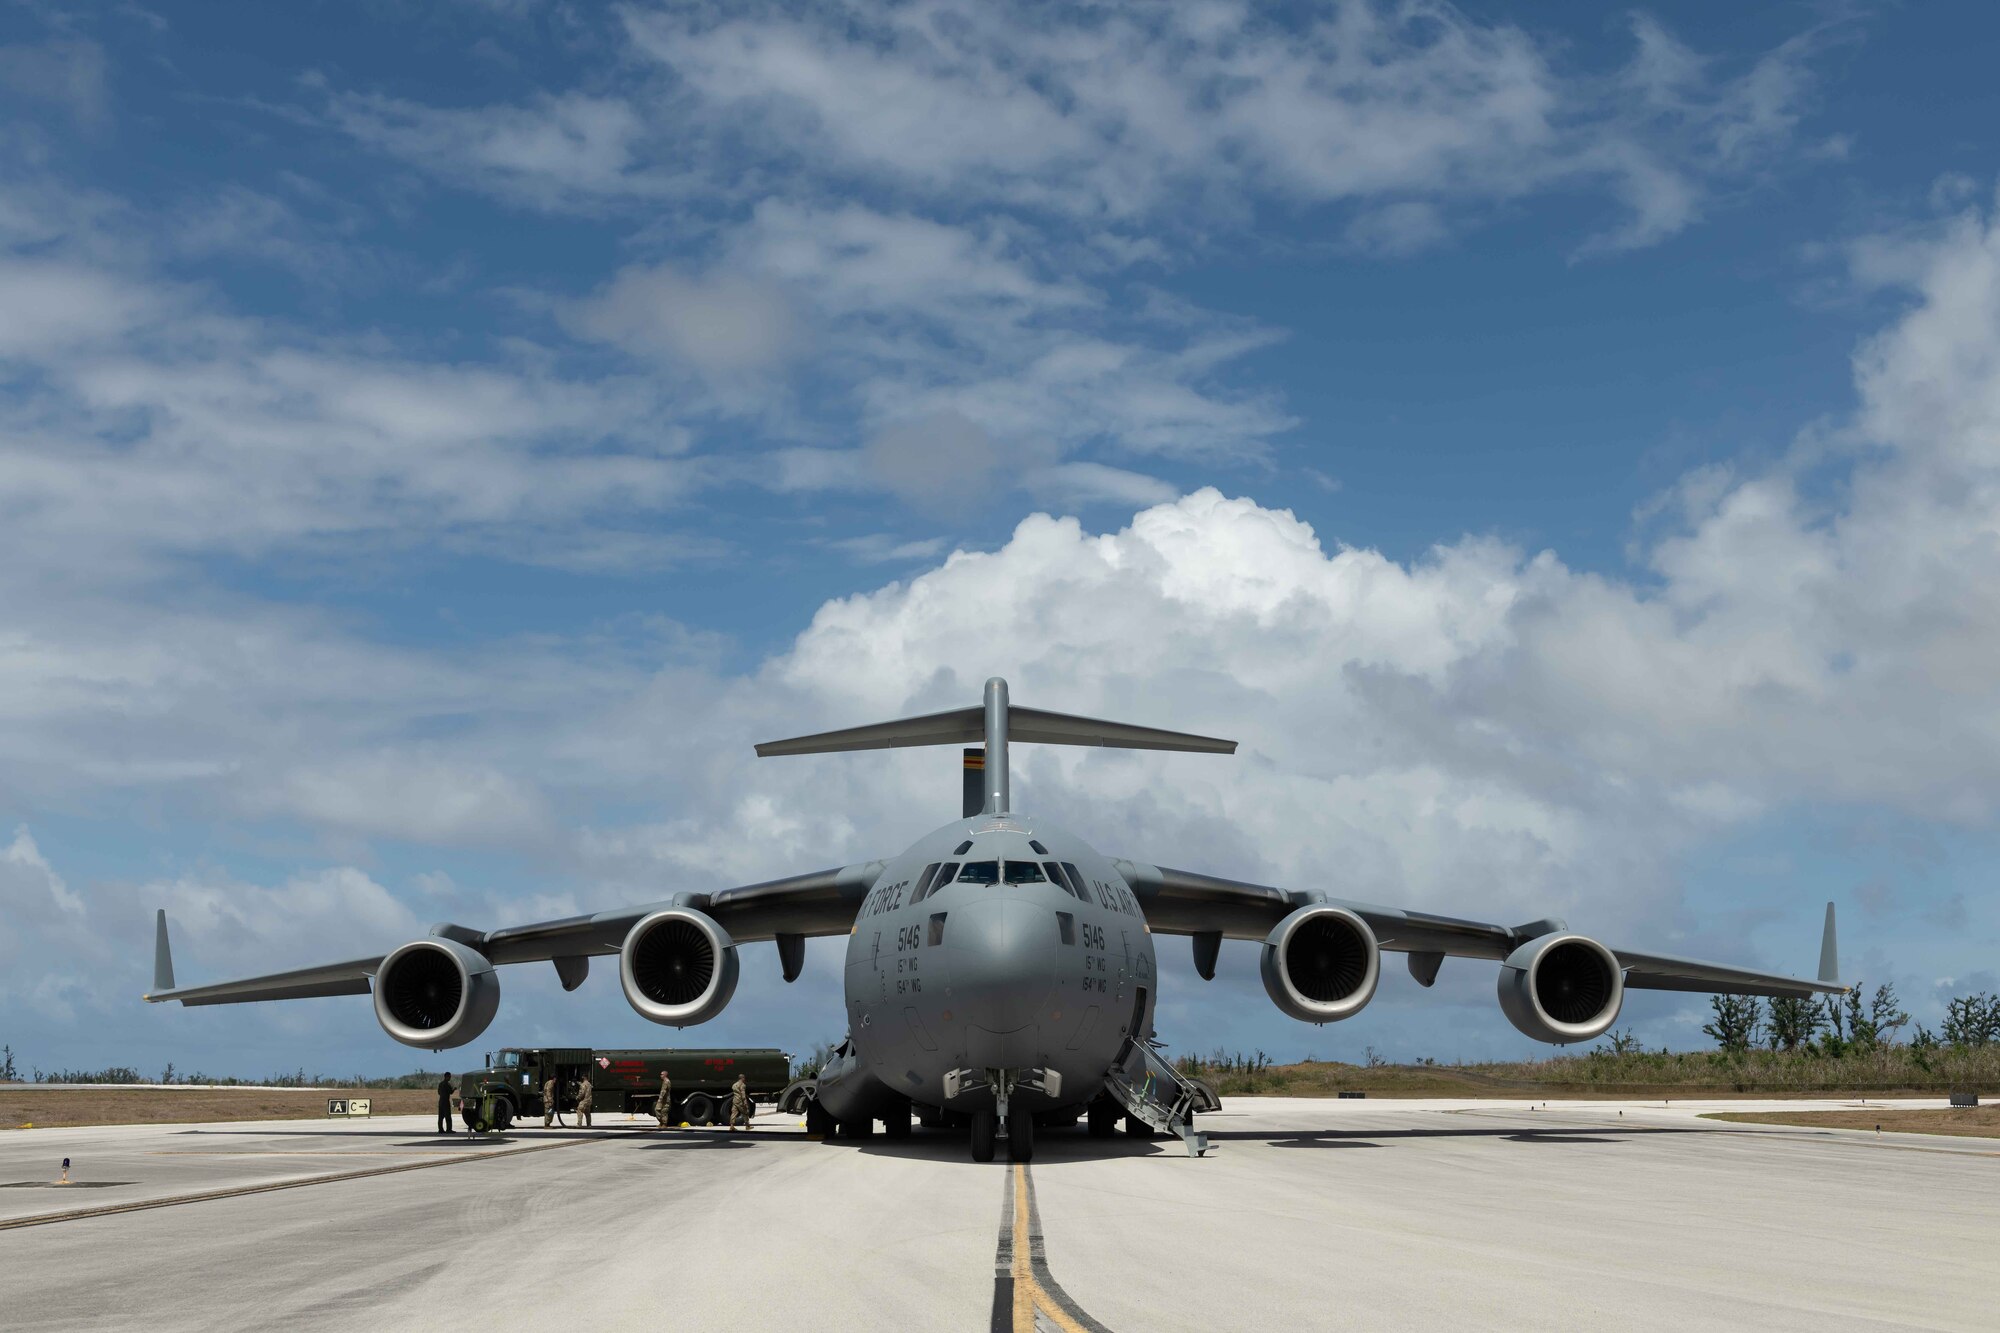 U.S. Air Force Airmen pump fuel from a C-17 Globemaster to a fuel truck at Tinian International Airport, Tinian, during exercise Resilient Typhoon, April 23, 2019. The aircraft dispersal exercise, based from Andersen Air Force Base, Guam, empowered Airmen at the tactical level to employ new approaches to operations in order to increase resiliency and readiness.  (U.S. Air Force photo by Airman 1st Class Matthew Seefeldt)